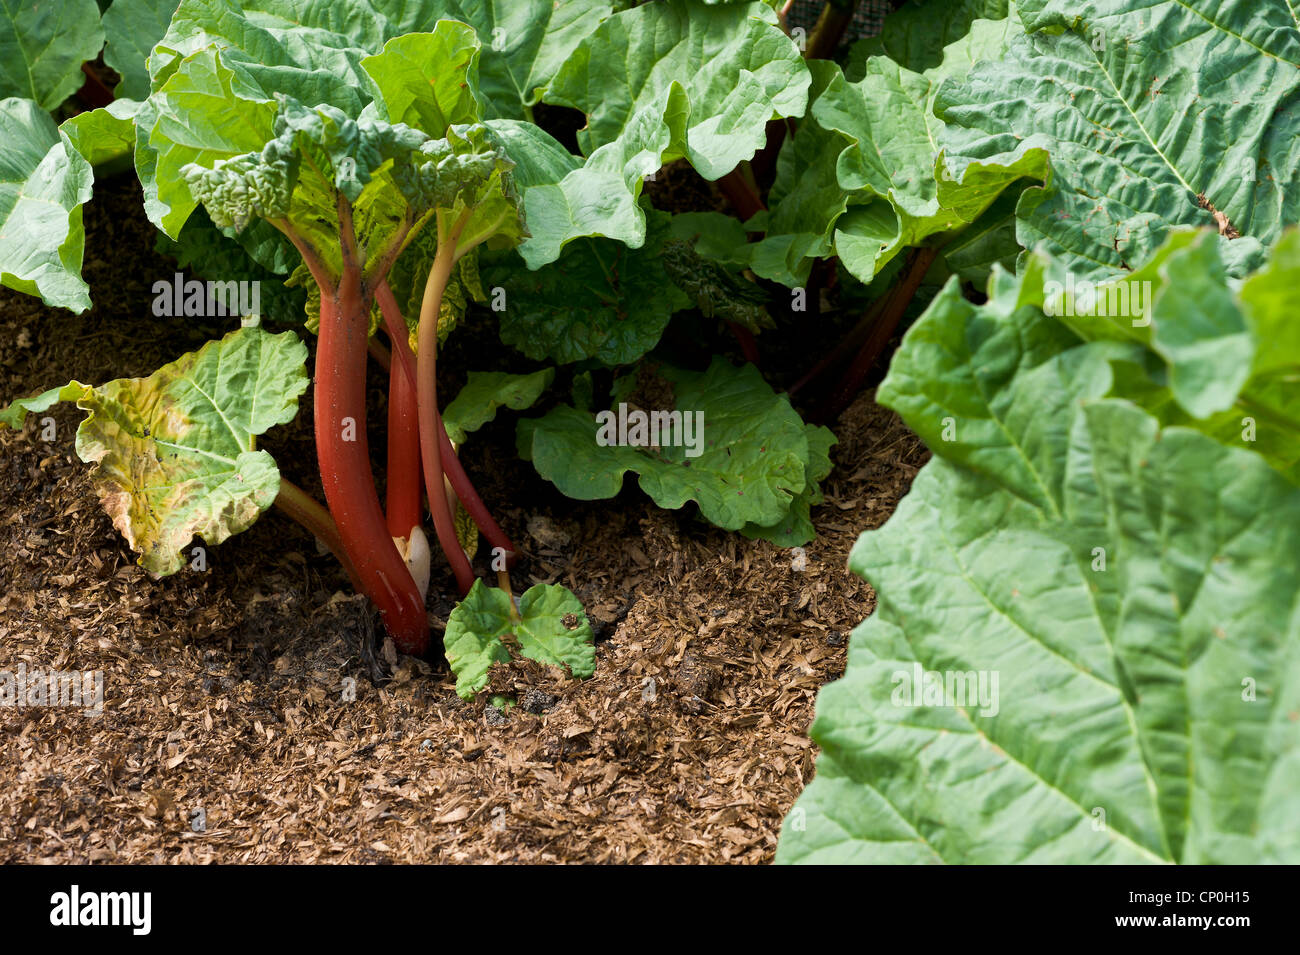 Rhubarb which has been forced under a plant pot Stock Photo